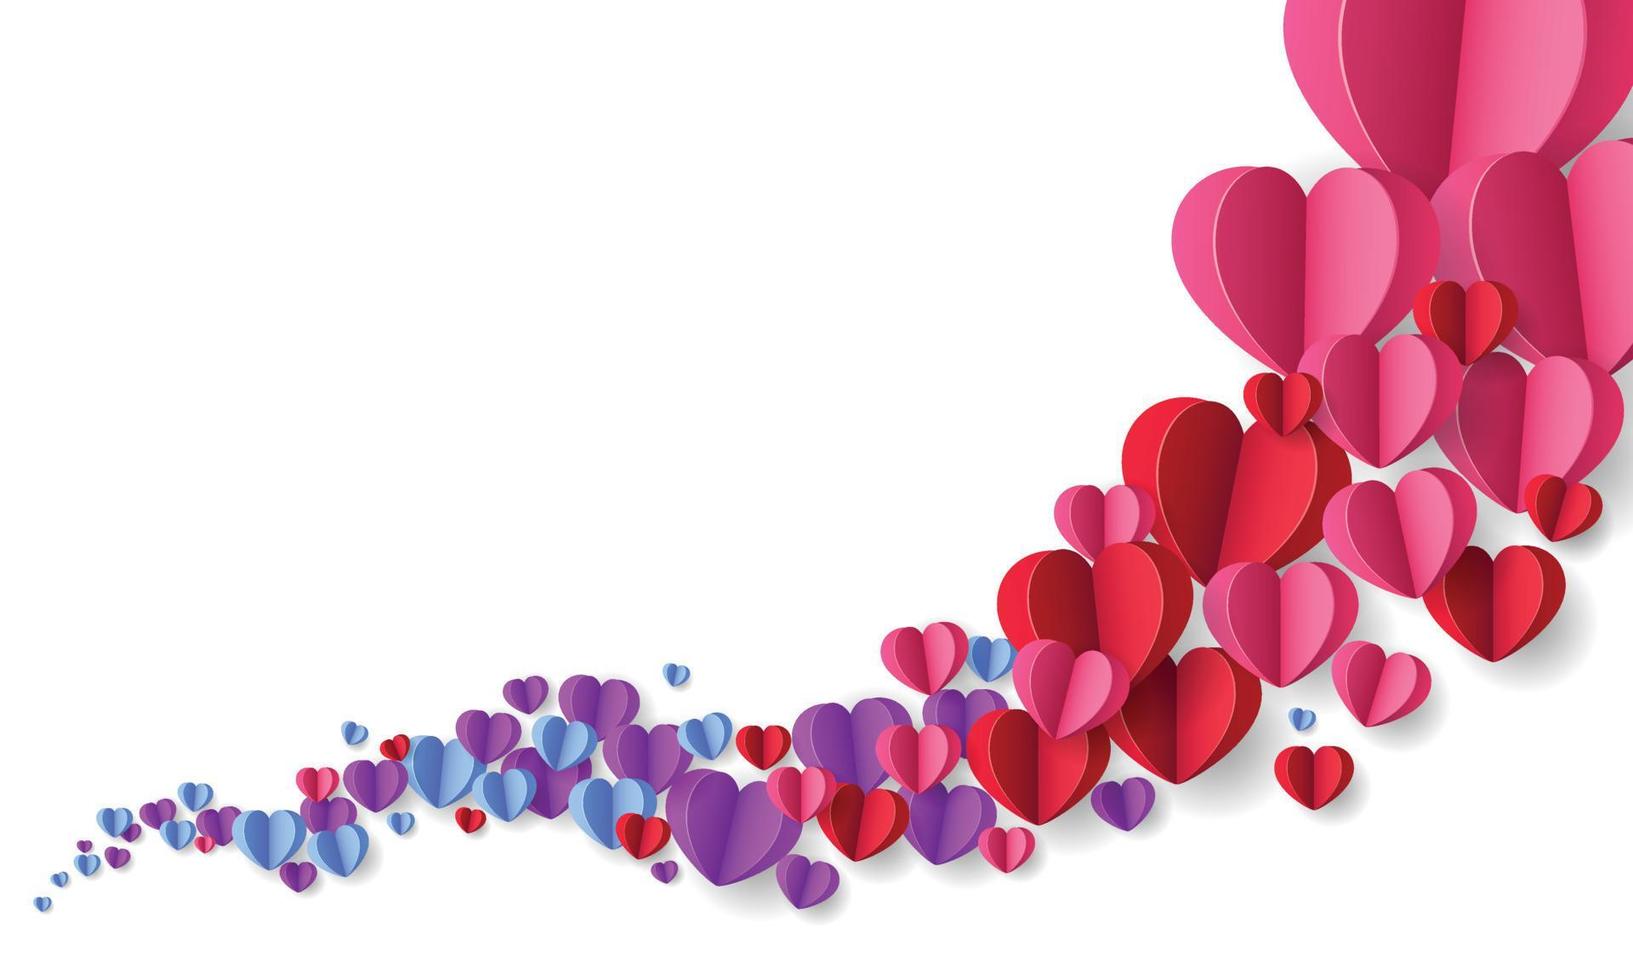 paper hearts on a white background vector